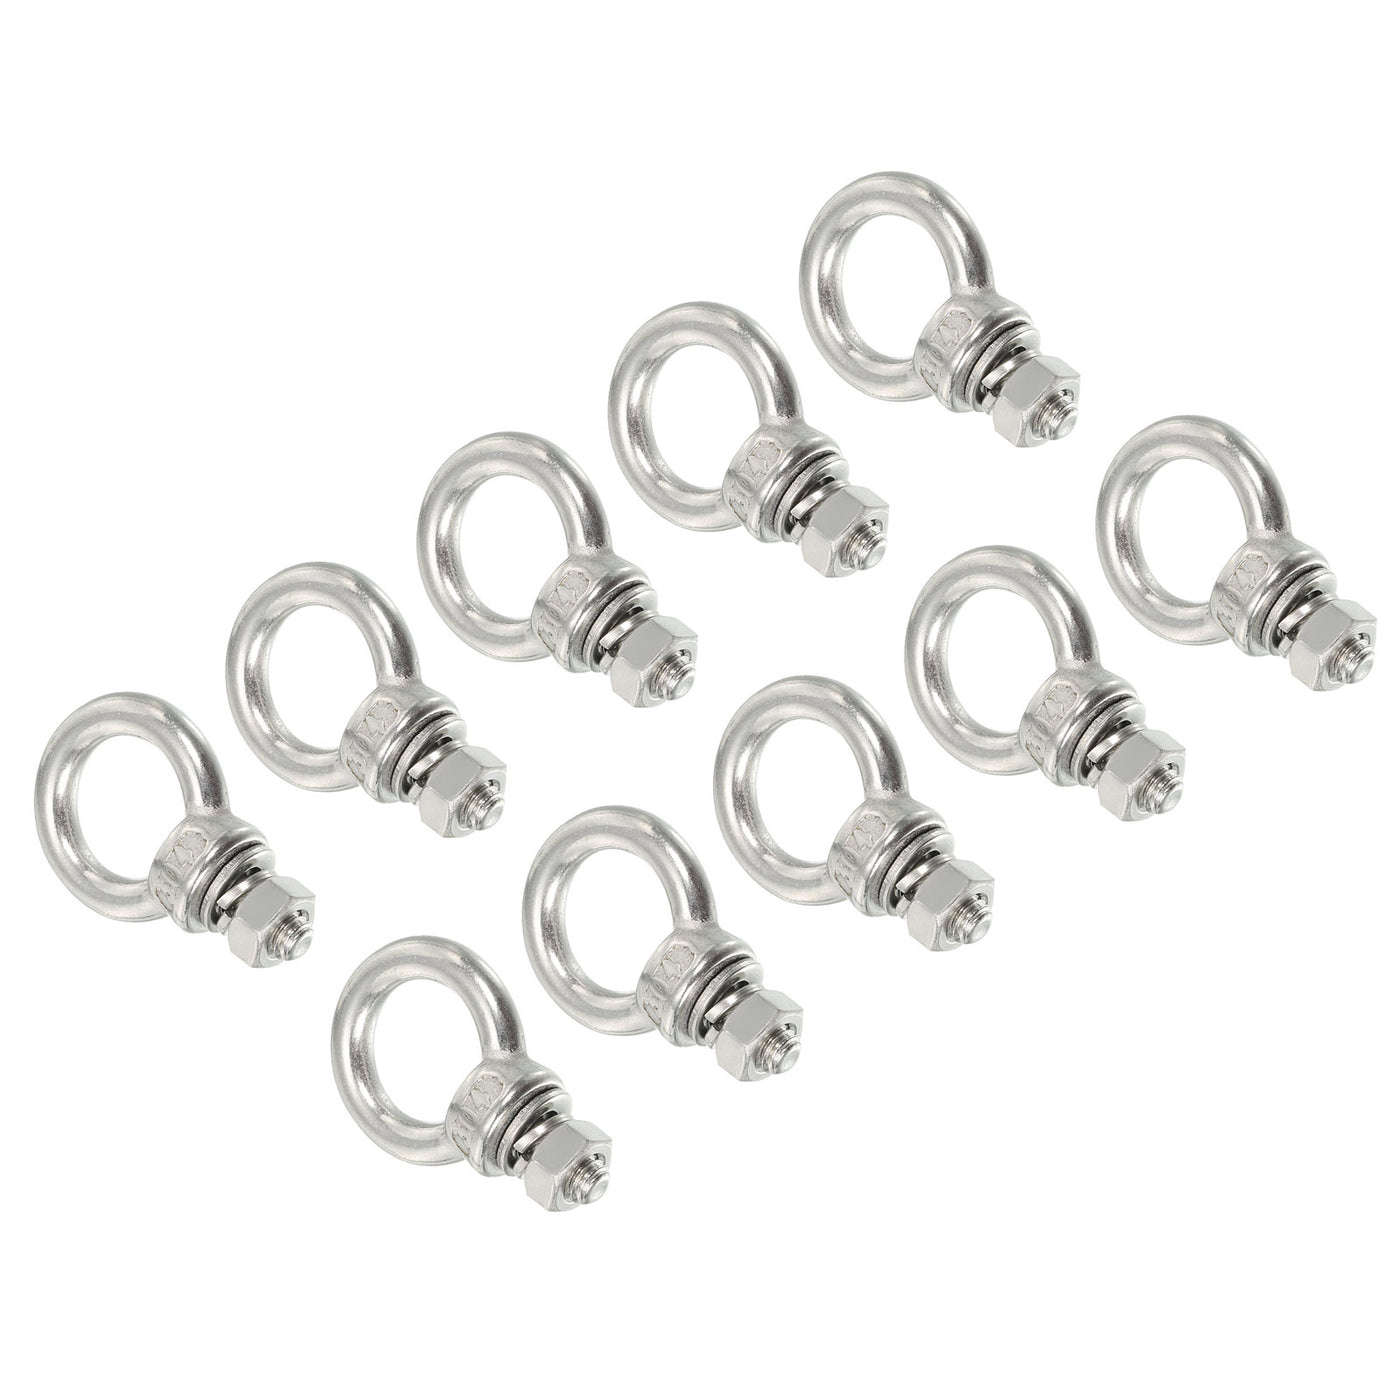 uxcell Uxcell M6x12 1/4"x1/2" Stainless Steel Eye Bolts Threaded Screw Eyebolt Shoulder Ring with Nuts Washers for Lifting Hanging, 10 Set